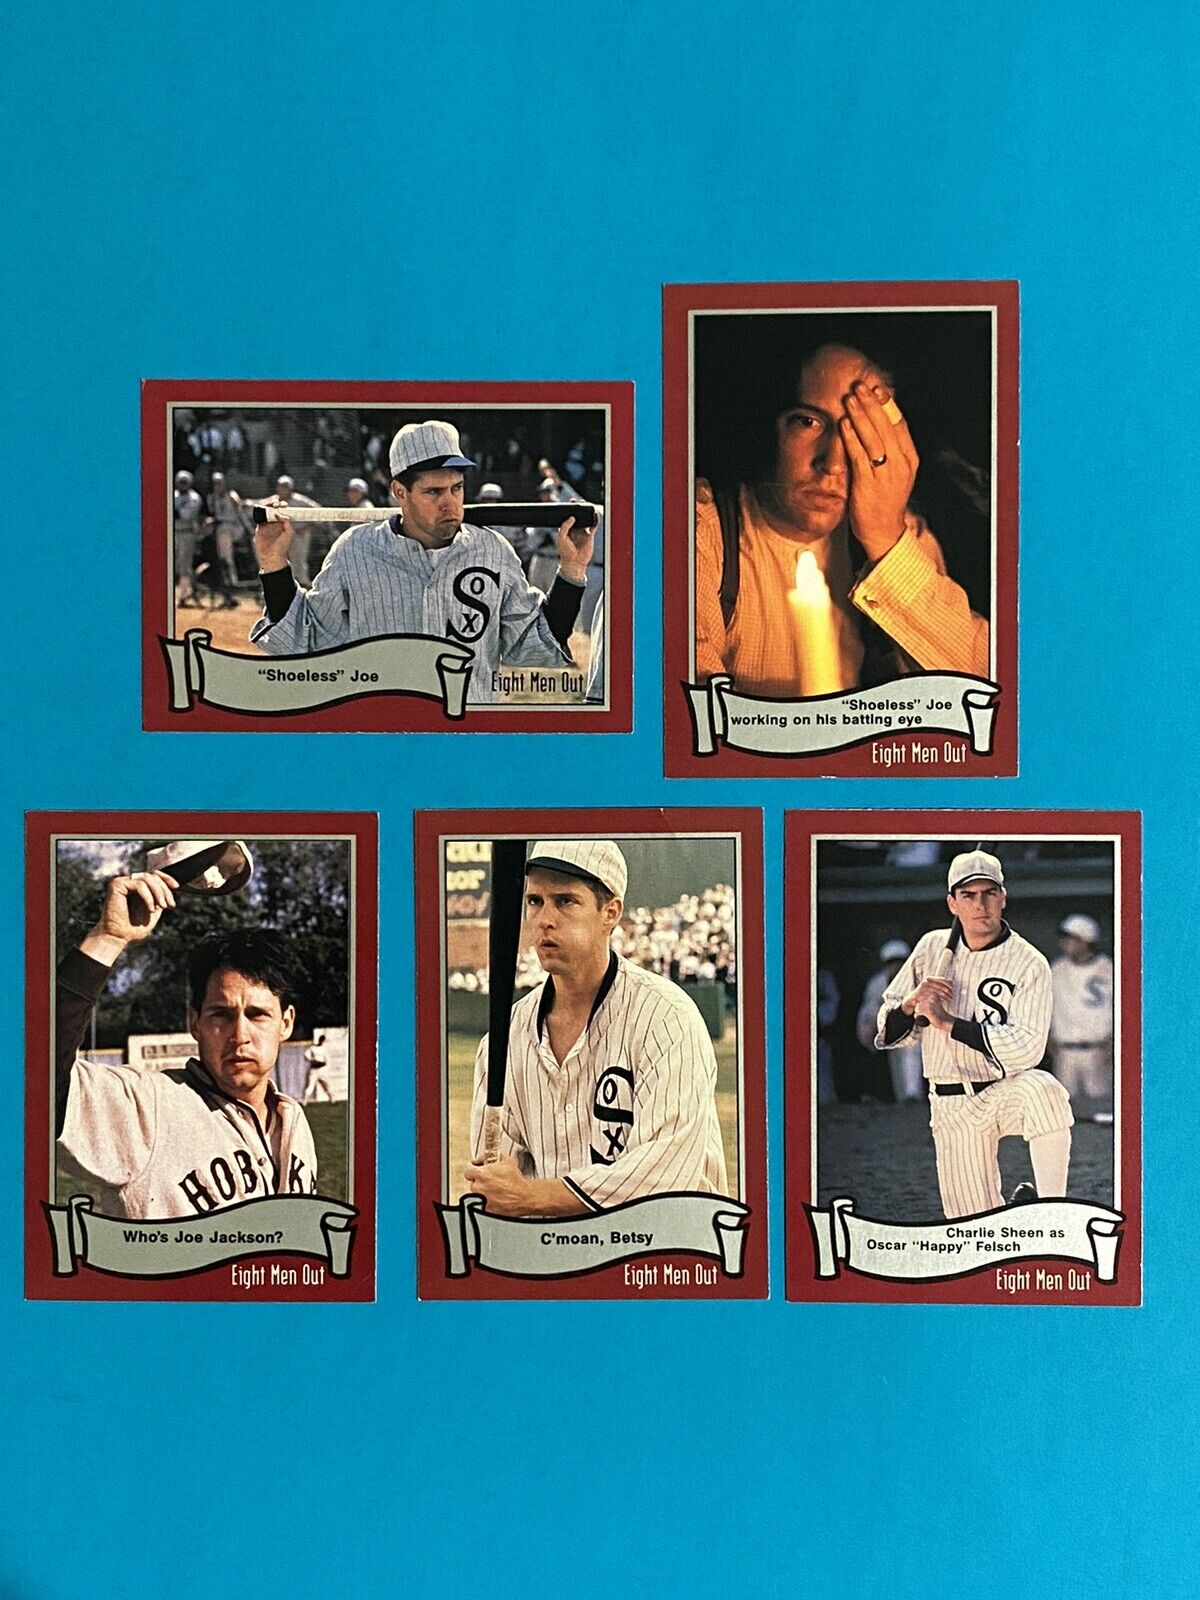 1988 Pacific Eight Men Out Movie Baseball Card Lot Charlie Sheen DB Sweeney